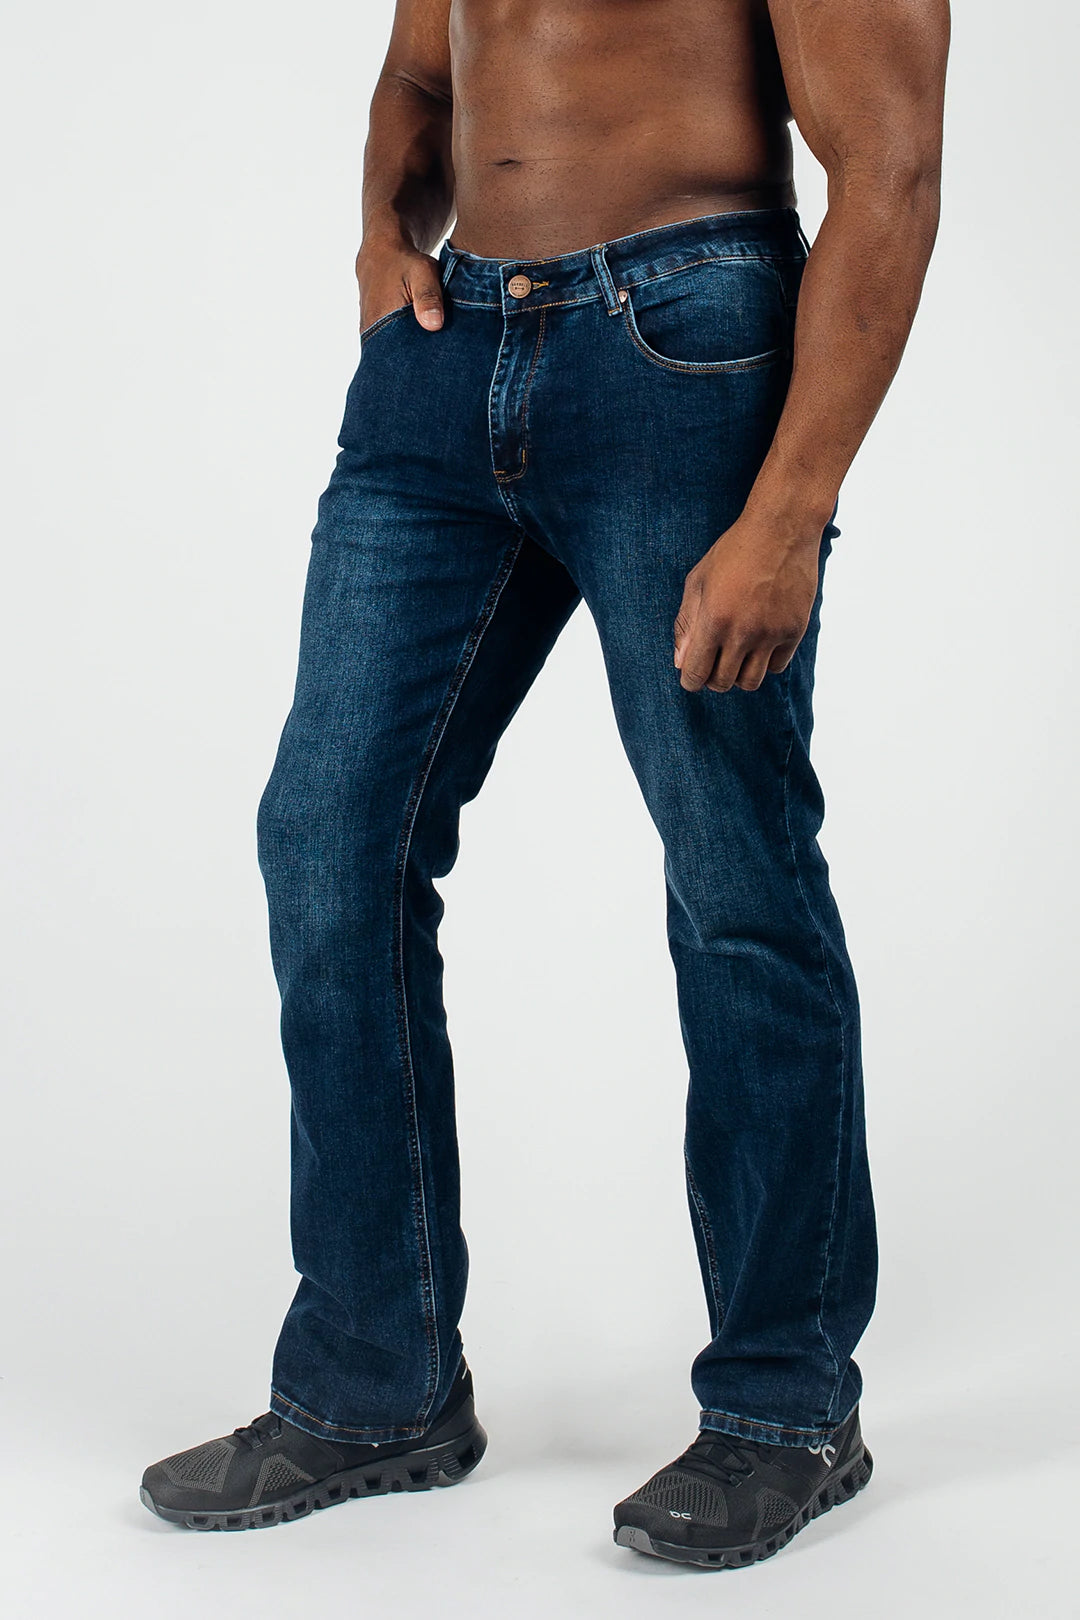 What Shoes to Wear with Bootcut Jeans | Democracy Clothing